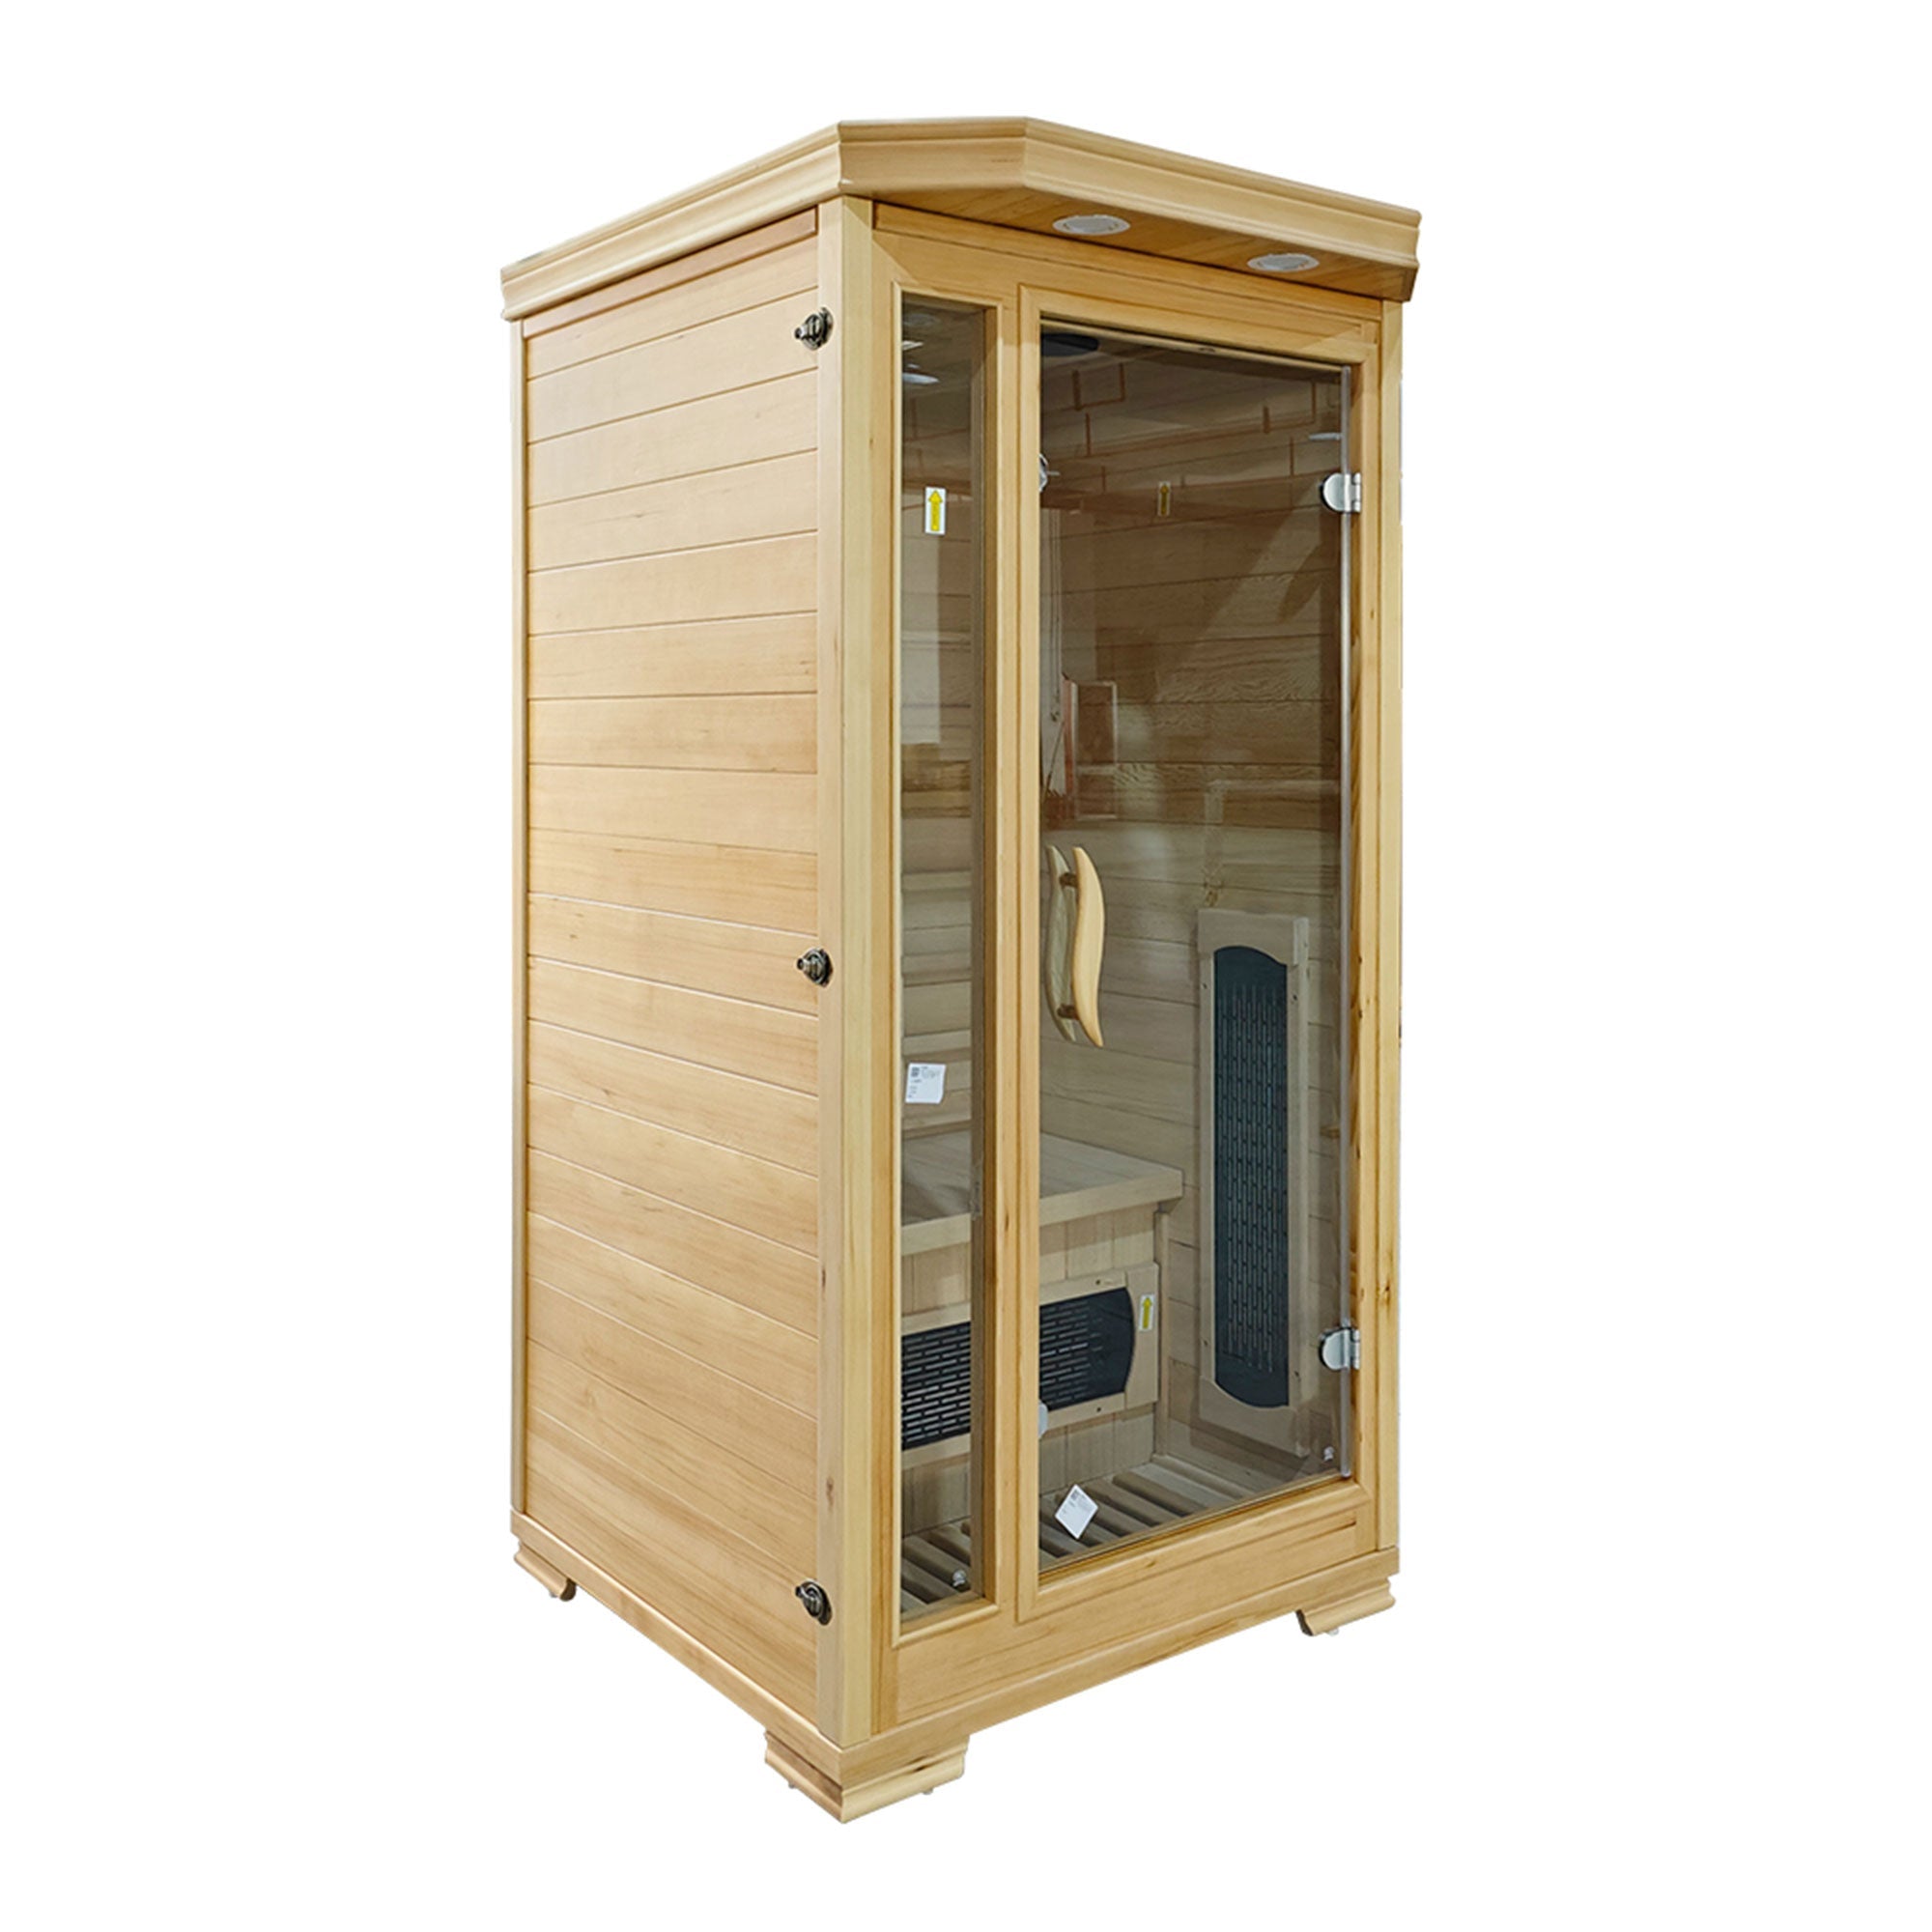 JOMEED's-6.2-Foot-2-Person-Compact-Home-Wooden-Sauna-with-Digital-Control-System-Exercise-&-Fitness